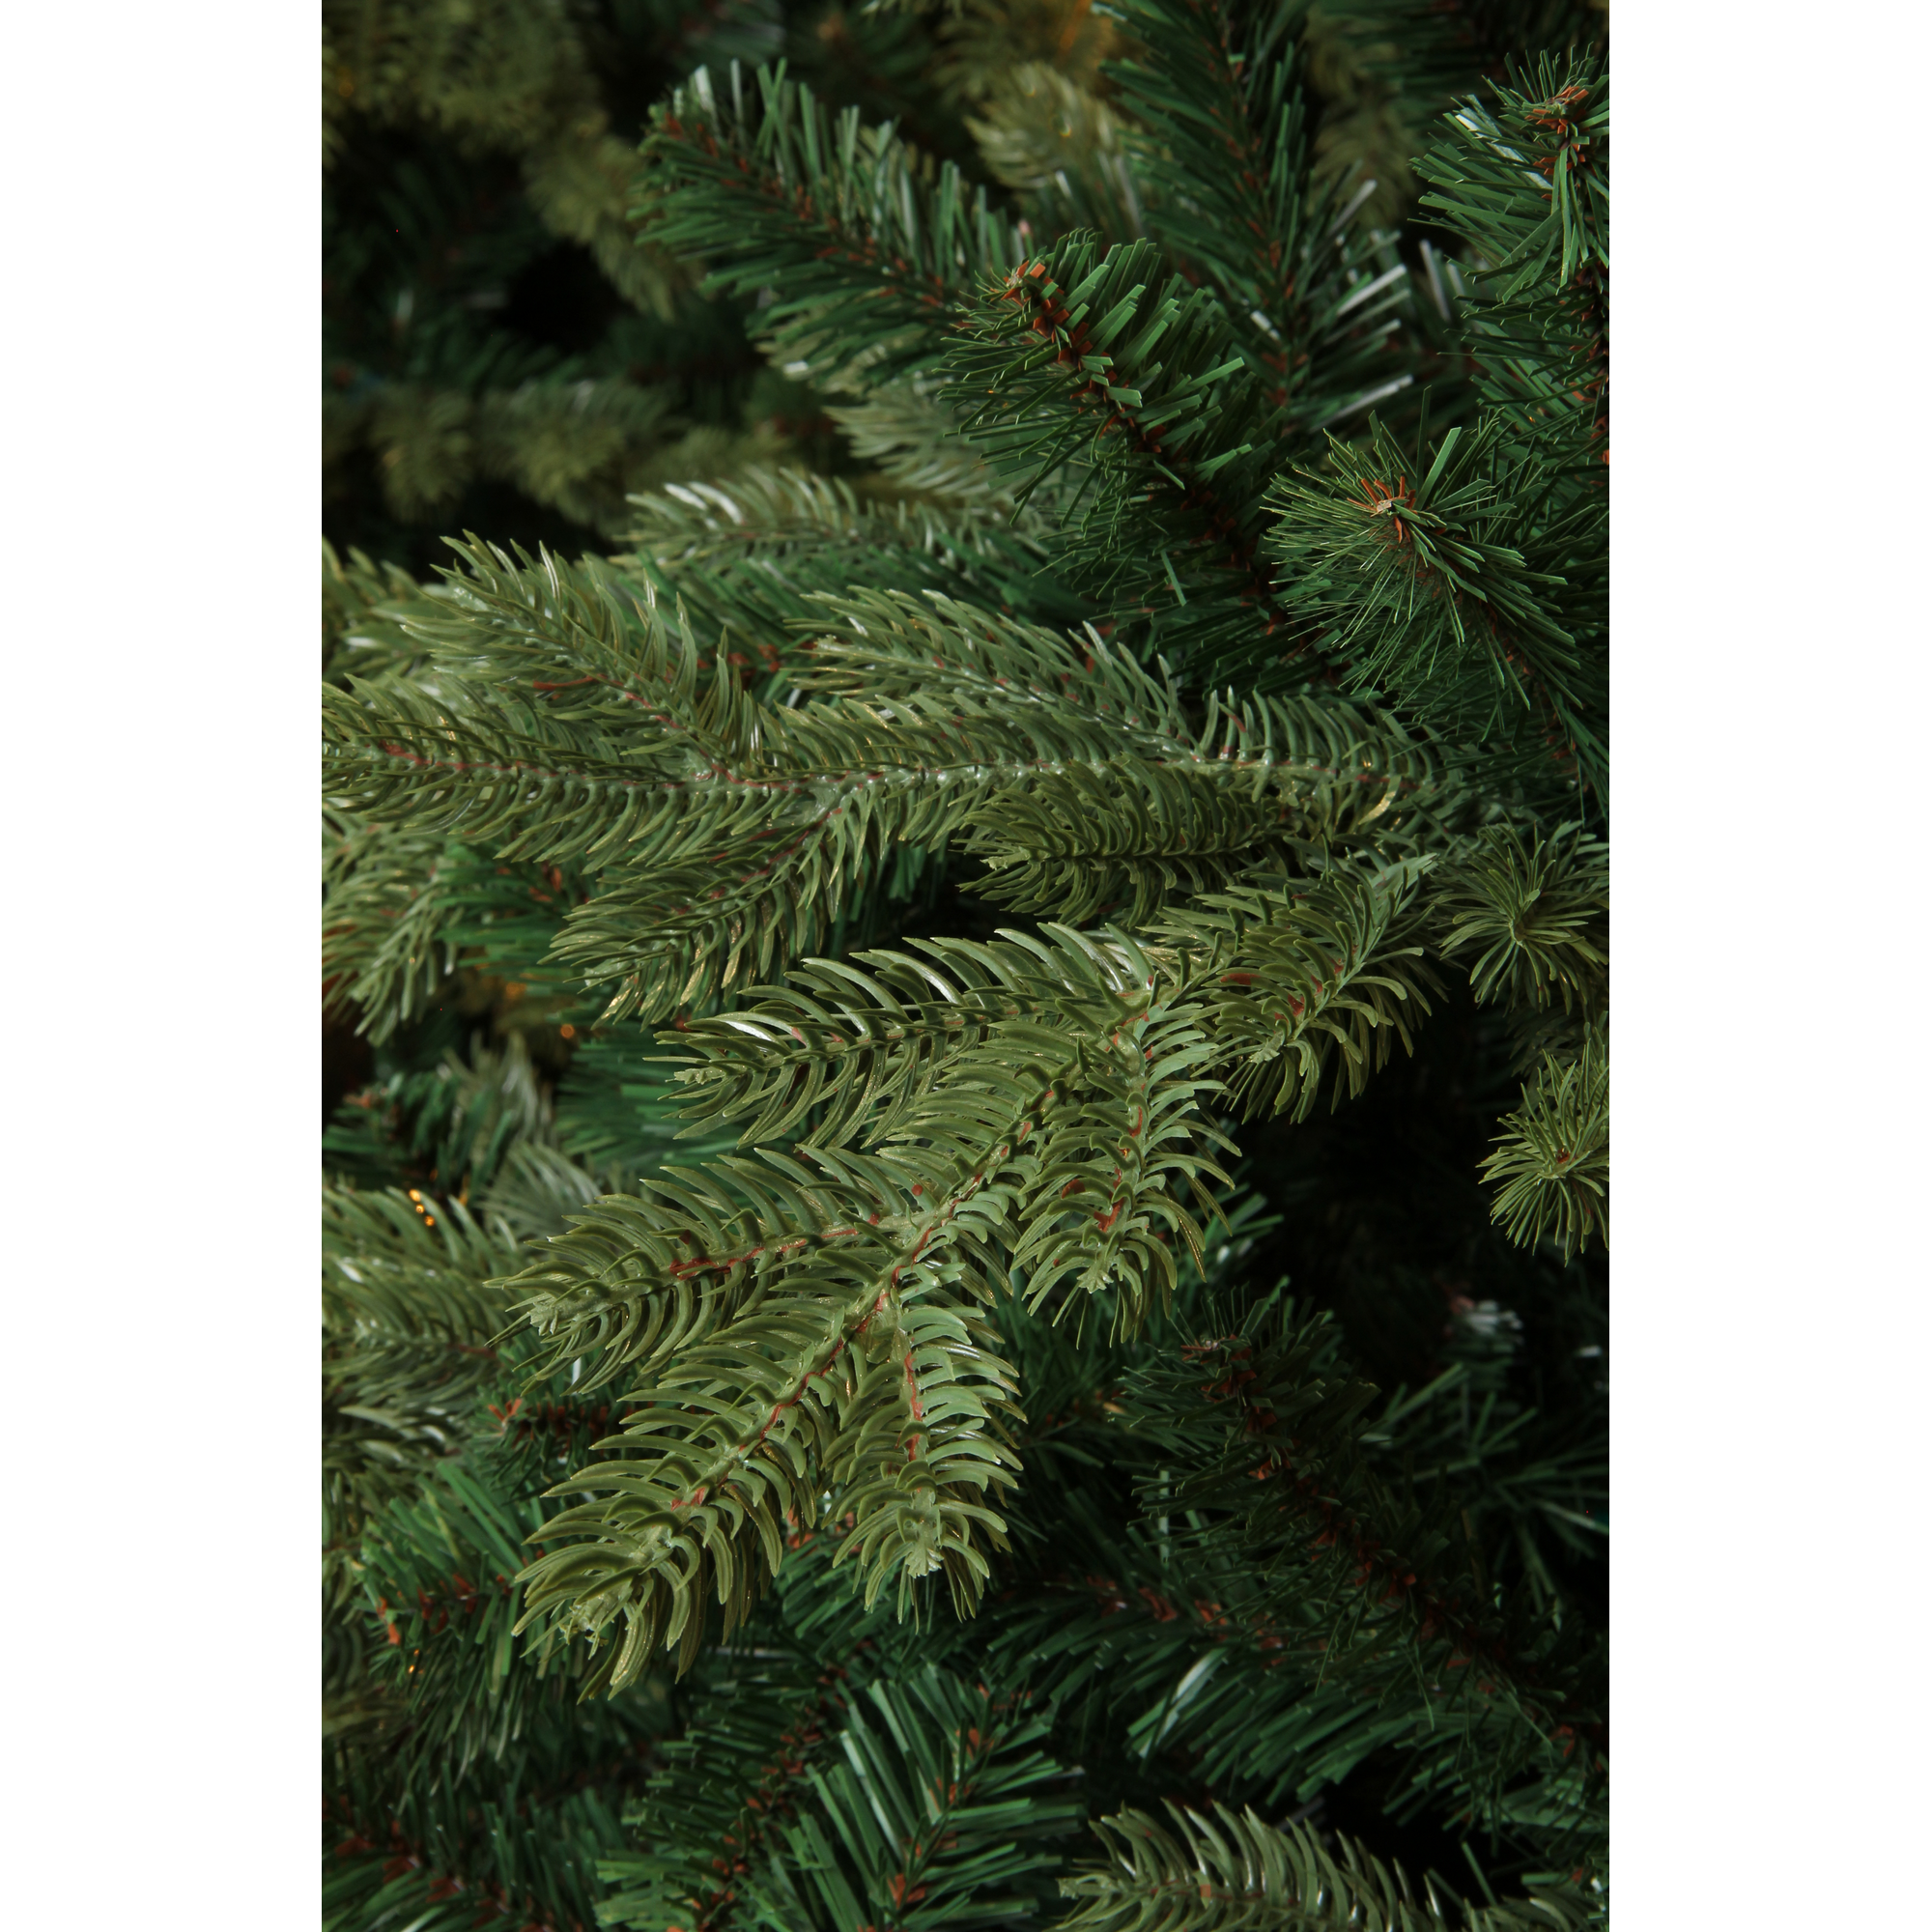 Weihnachtsbaum 'Sherwood' deluxe green 185 cm + product picture